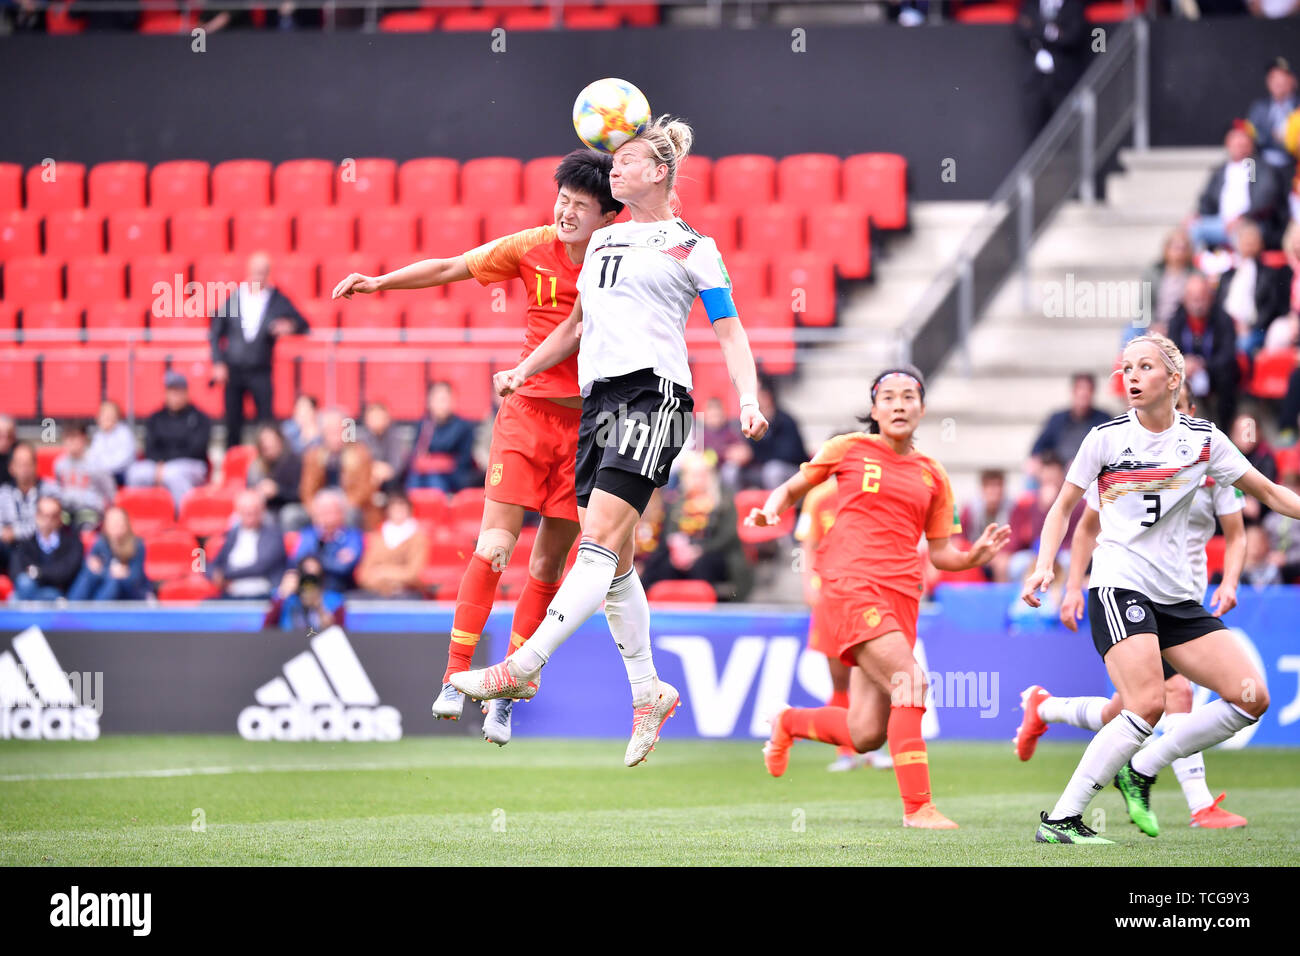 Rennes, France. 8th June, 2019. Alexandra Popp (R) of Germany competes during the group B match between Germany and China at the 2019 FIFA Women's World Cup in Rennes, France, June 8, 2019. Credit: Chen Yichen/Xinhua/Alamy Live News Stock Photo